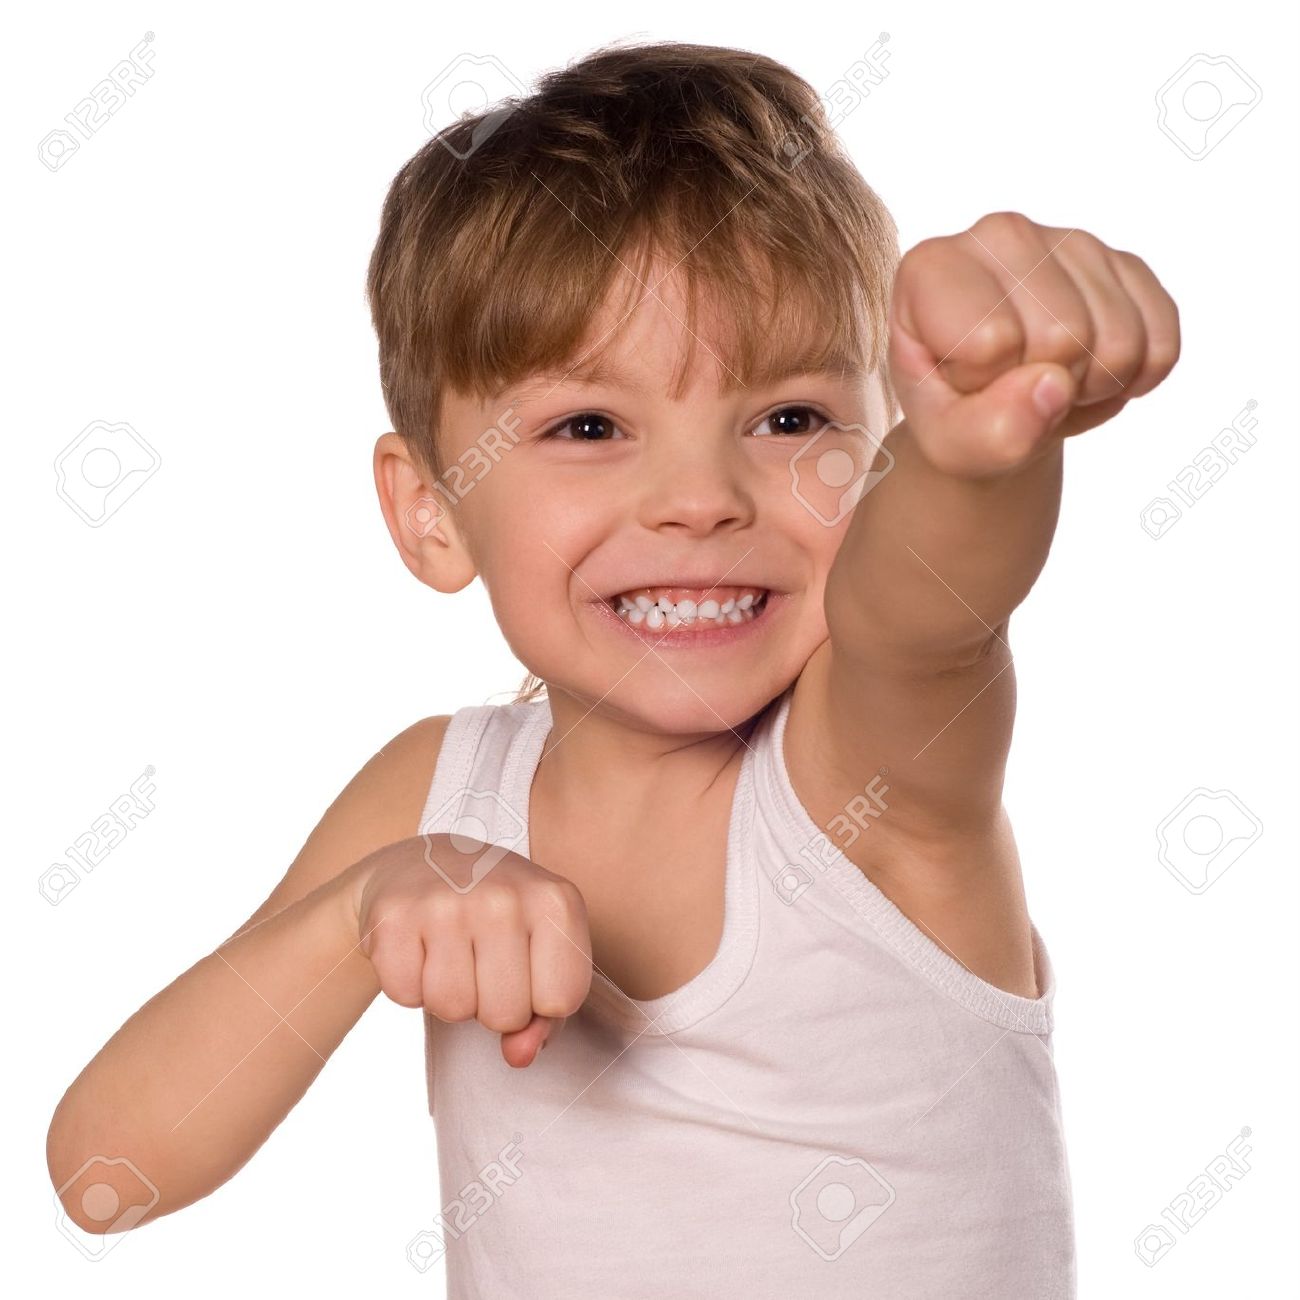 Little Boy Showing Boxing Punch Funny Picture